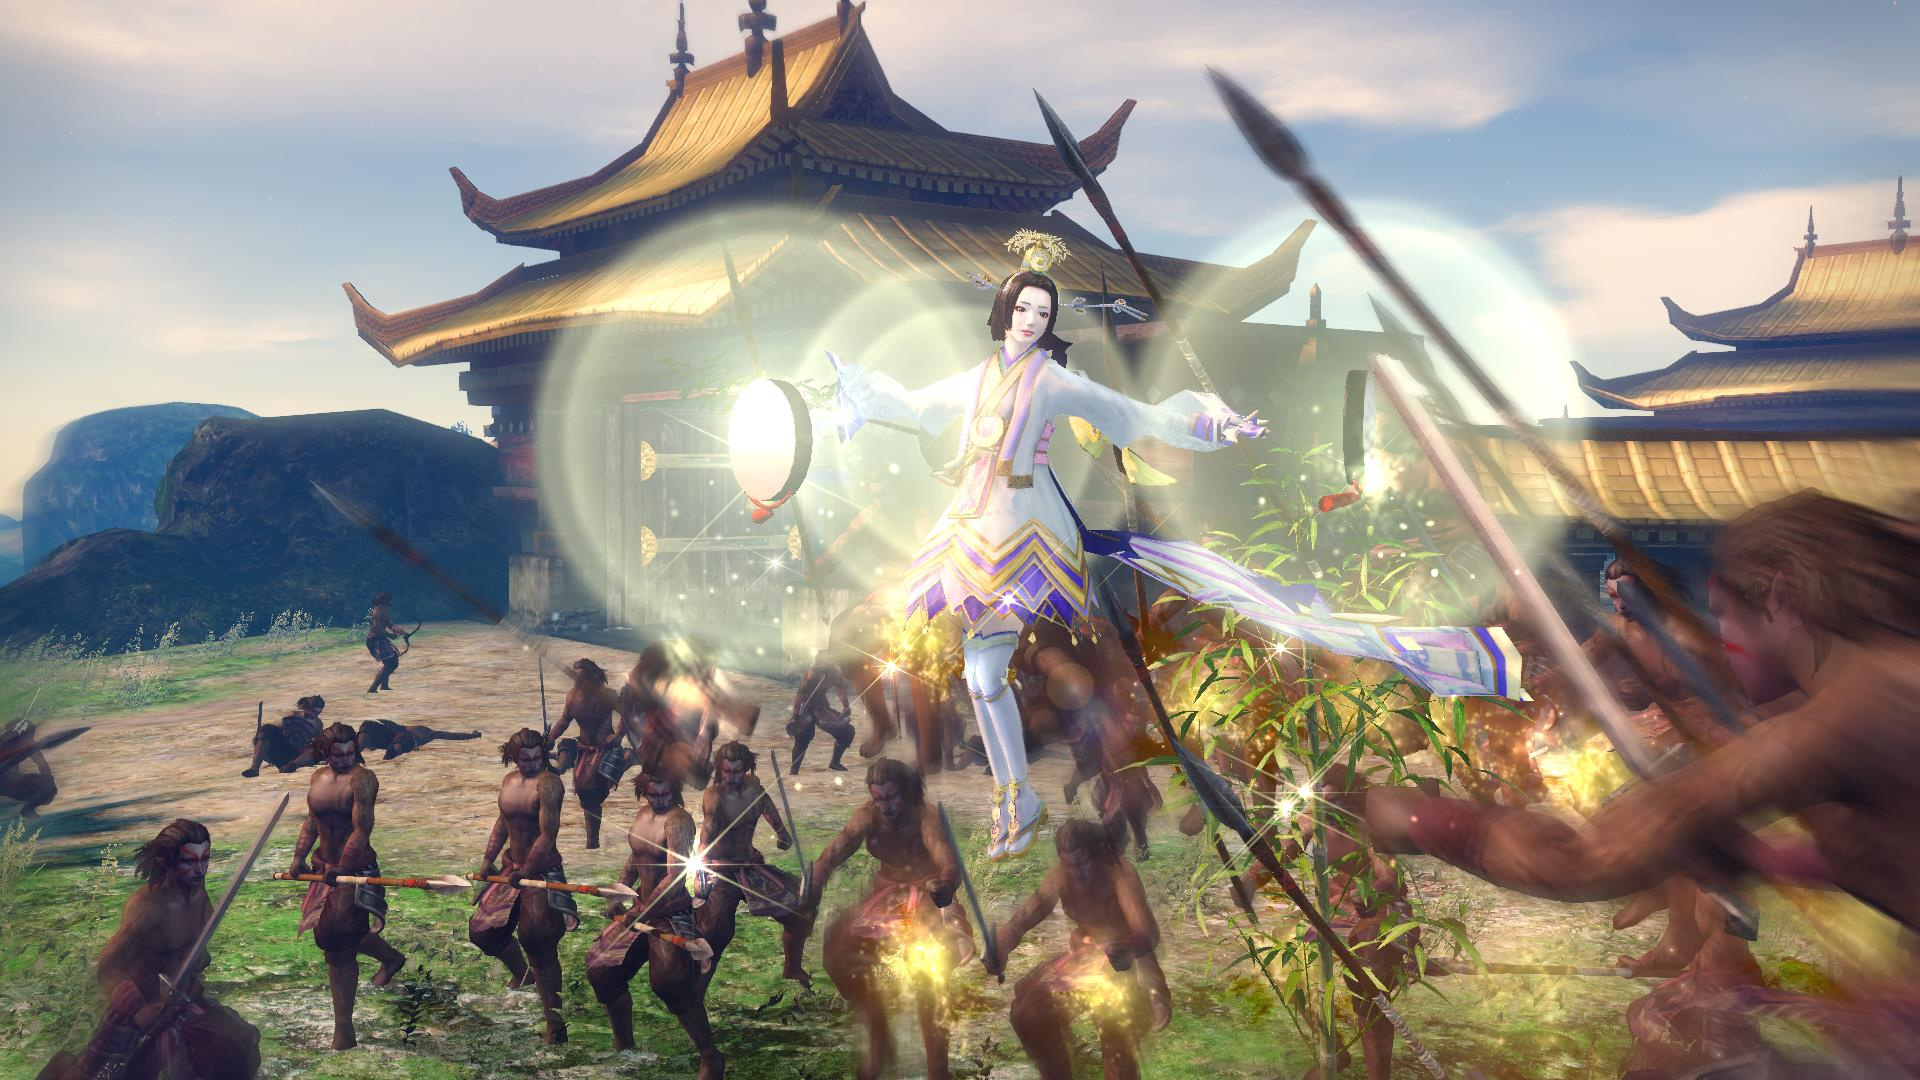 Warriors Orochi 3 Ultimate Ps4